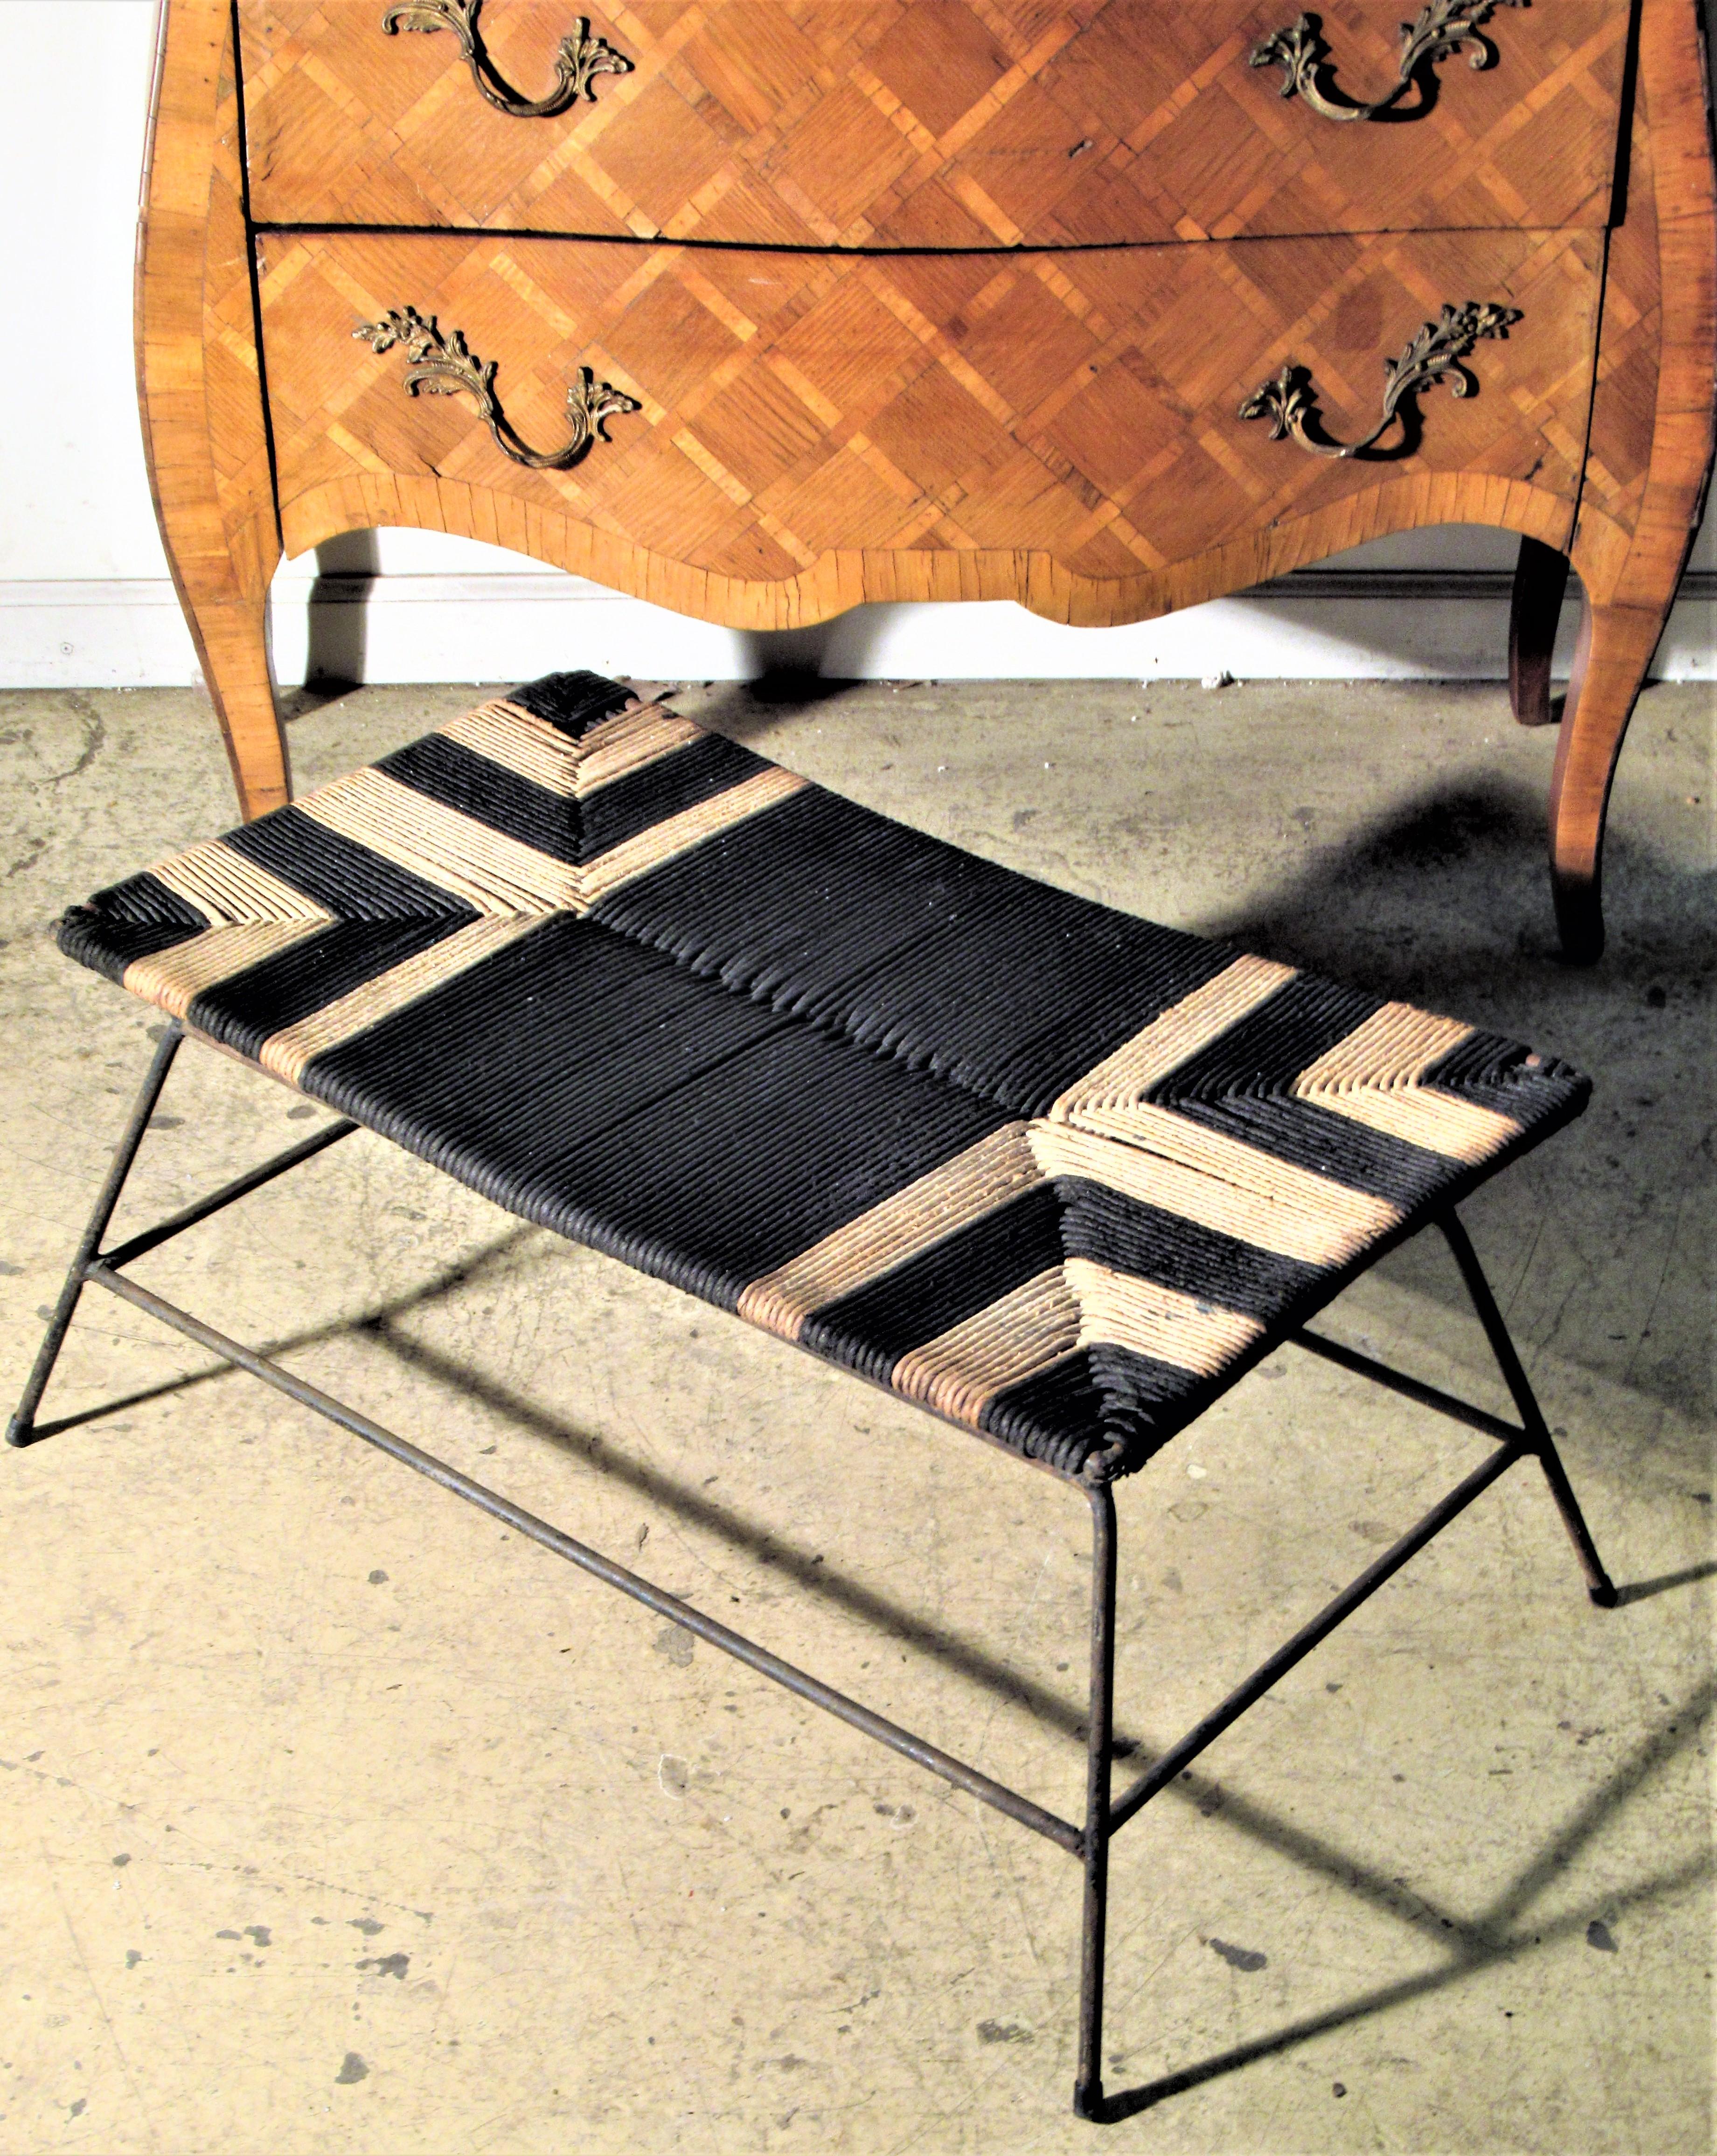 Sculptural modernist iron stool with a graphic tribal like designed hand woven fabric rope seat, circa 1950s. Great looking. Look at all pictures and read condition report in comment section.